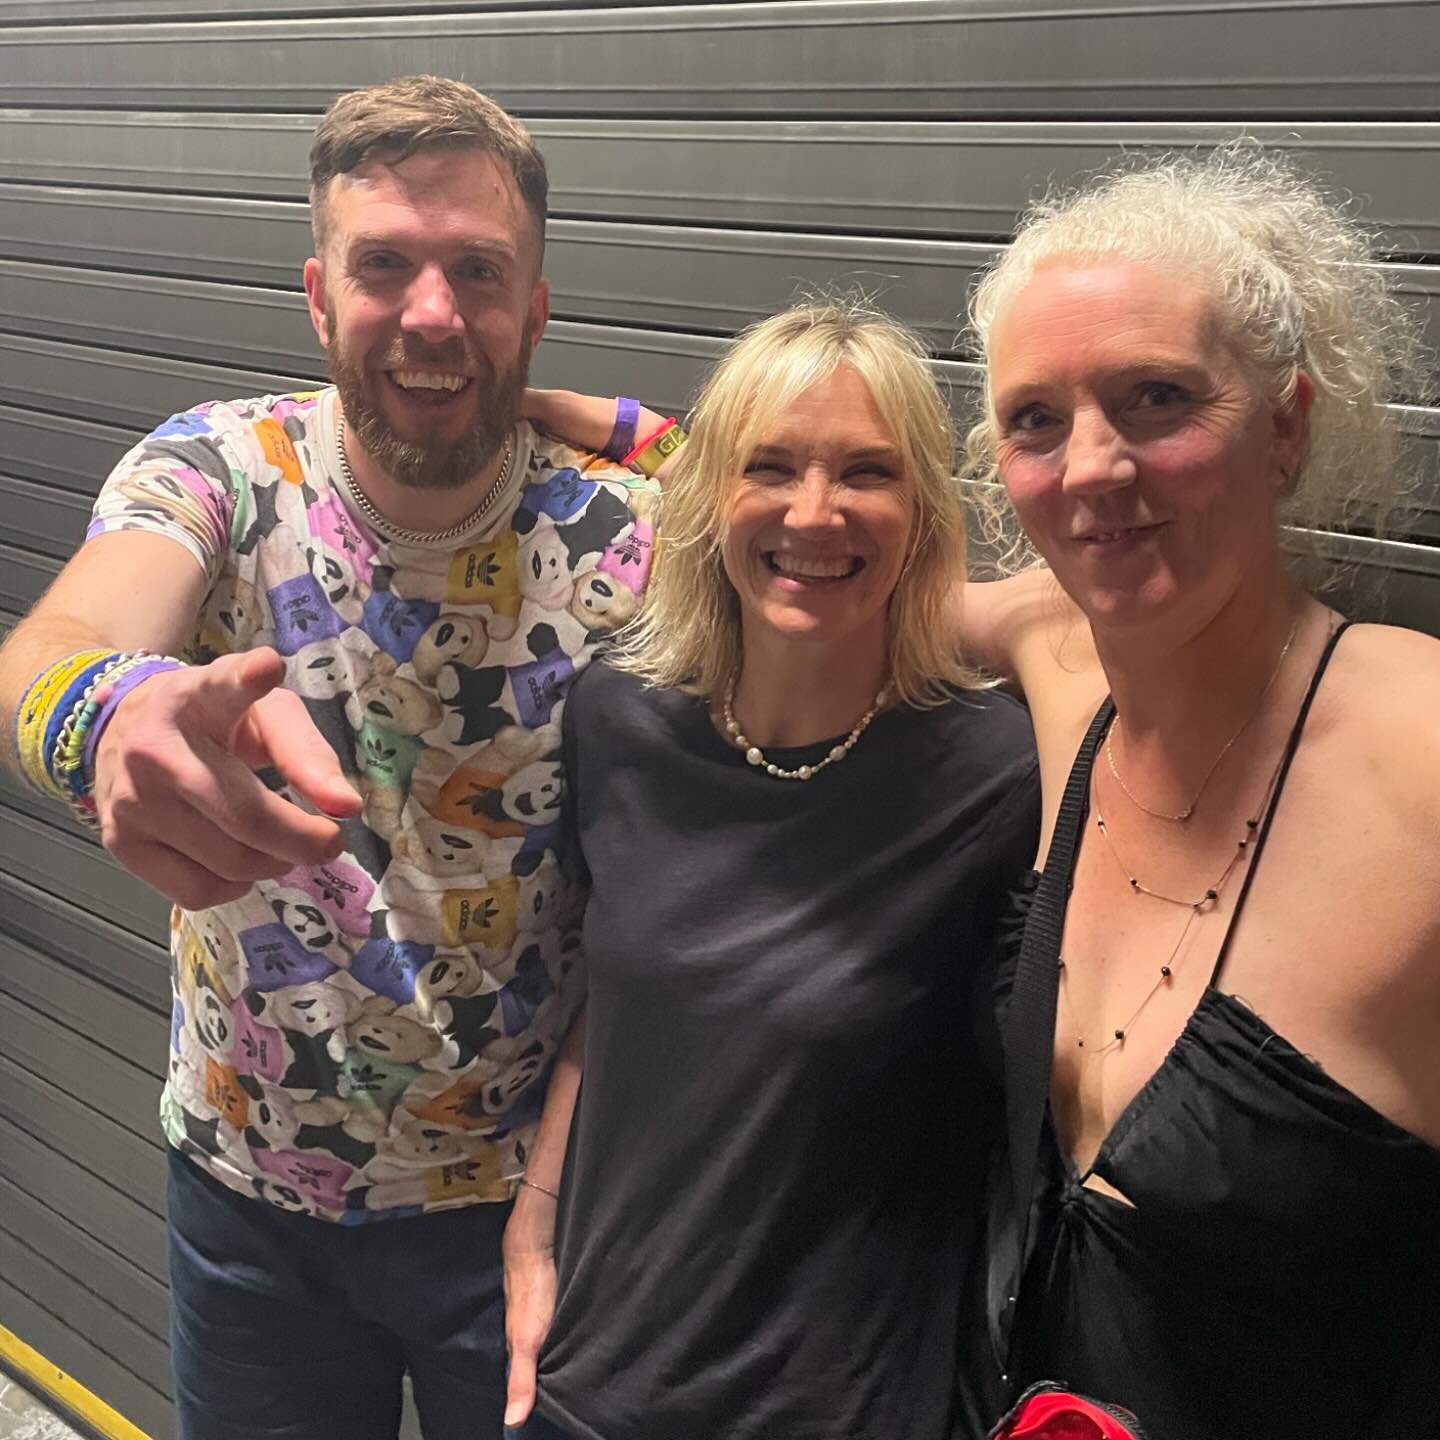 Such a brilliant night on Friday, incredible atmosphere at @90santhems, absolutely rocking in there! @jowhiley and @tobyspin smashed it as always, its such a joyful night, everyone working on the show is just so lovely. 
We had such a fun time back s